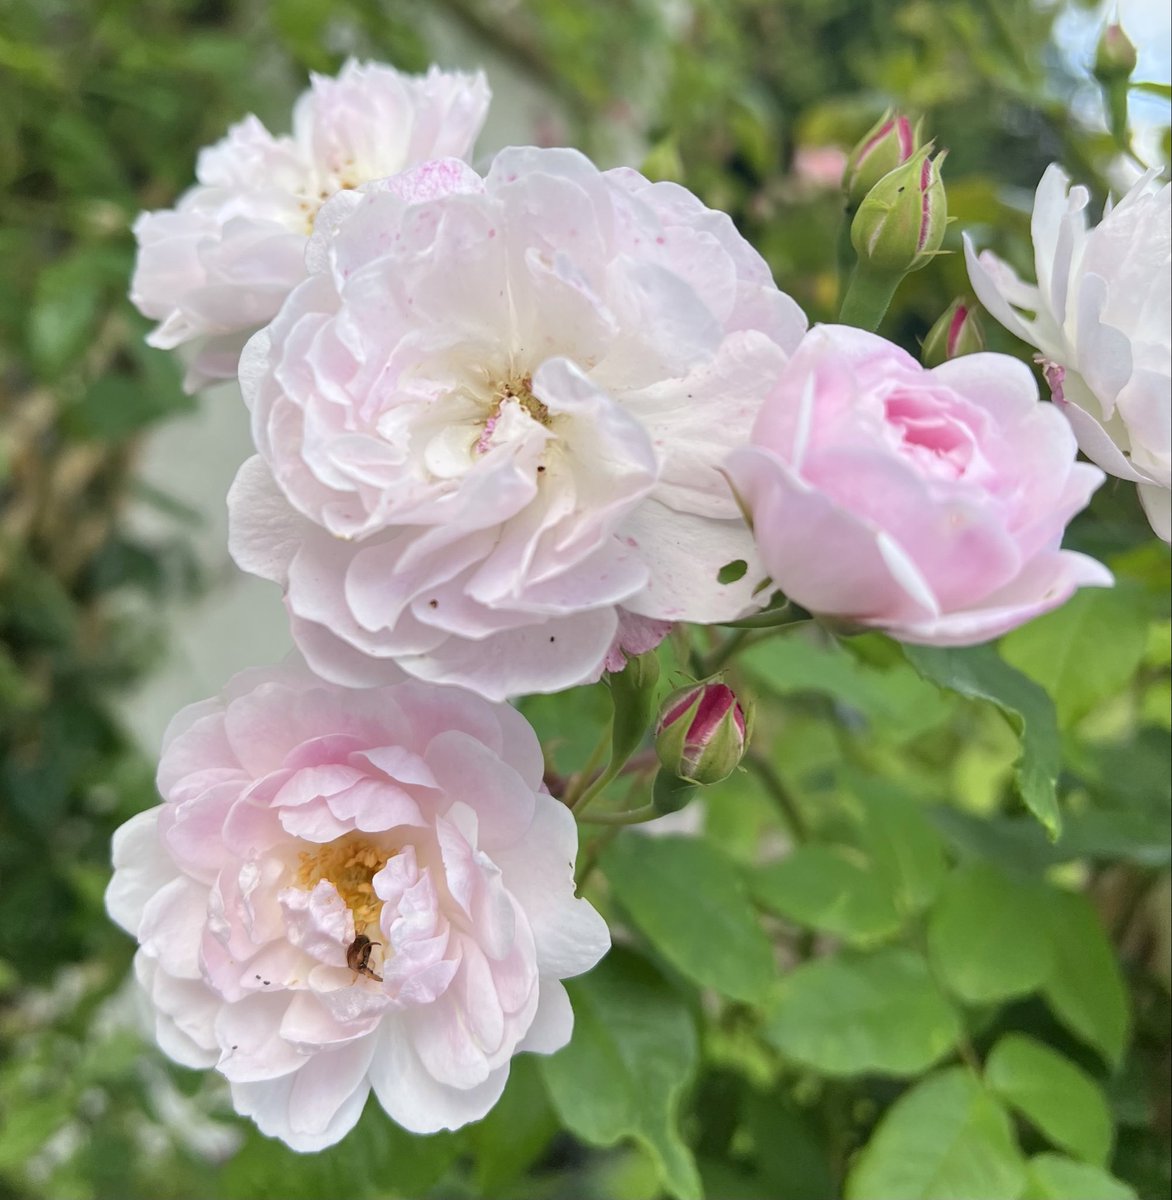 It’s Friday already! Pleased to see the second flush of my Blush Noisette #rose. Have a wonderful day everyone! 💕🌸🎀 #FridayPink #FlowersonFriday #FridayFeeling #NotRoseWednesday #Roses23 #FlowersOfTwitter #GardeningTwitter